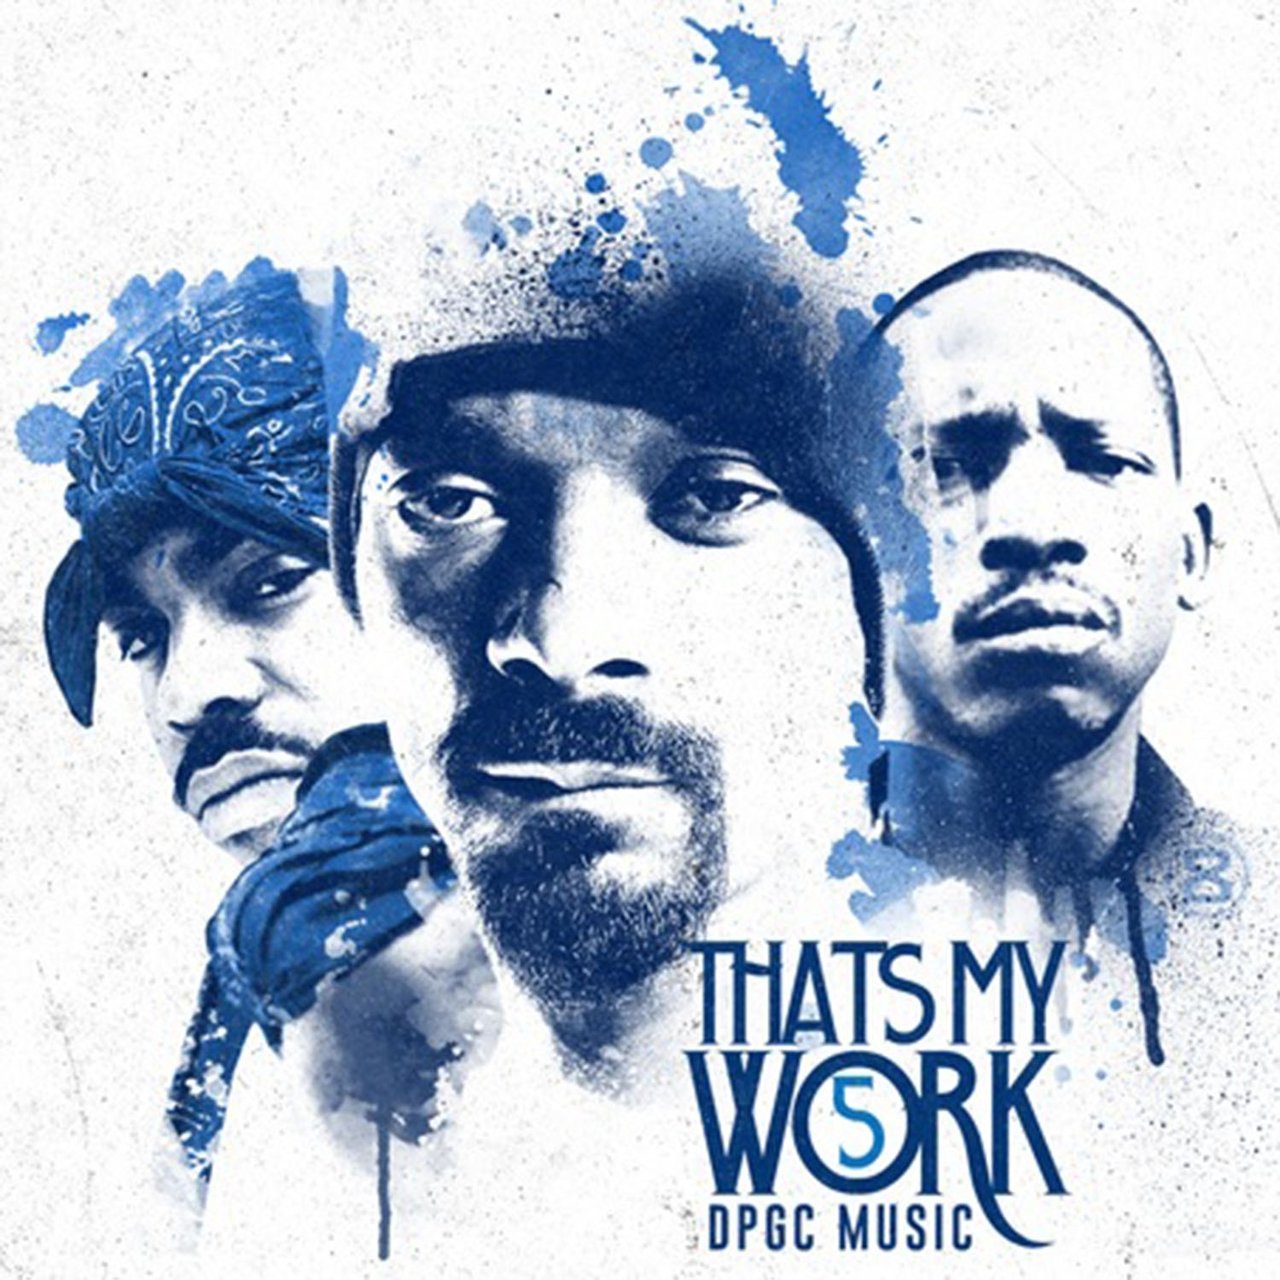 Snoop Dogg and Tha Dogg Pound - That's My Work 5 (Cover)